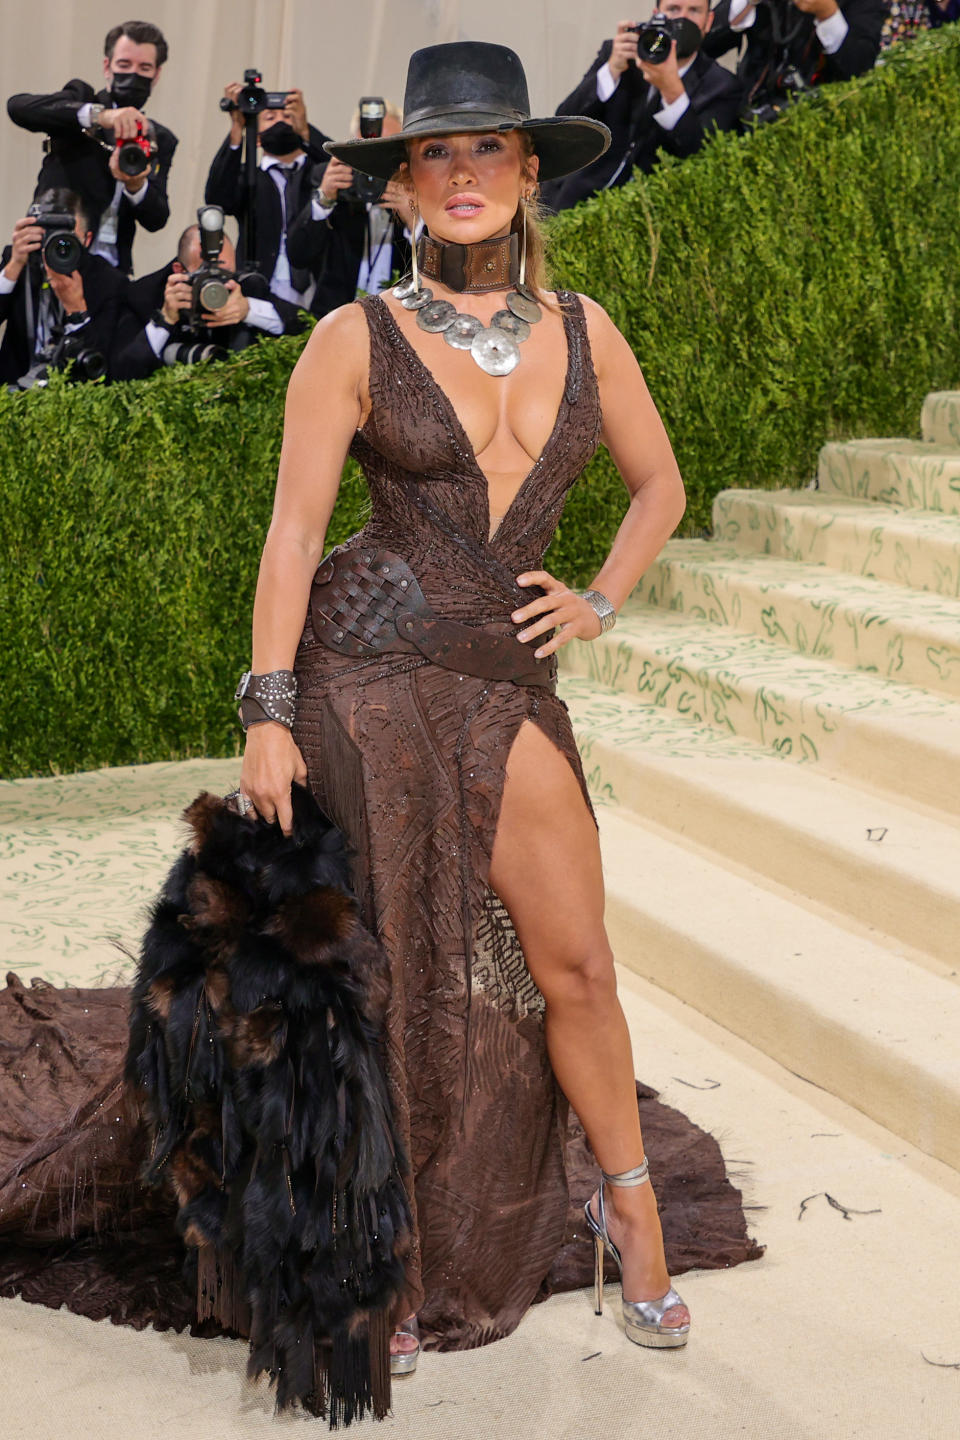 Jennifer Lopez attends The 2021 Met Gala Celebrating In America: A Lexicon Of Fashion at Metropolitan Museum of Art on September 13, 2021 in New York City. (Getty Images)